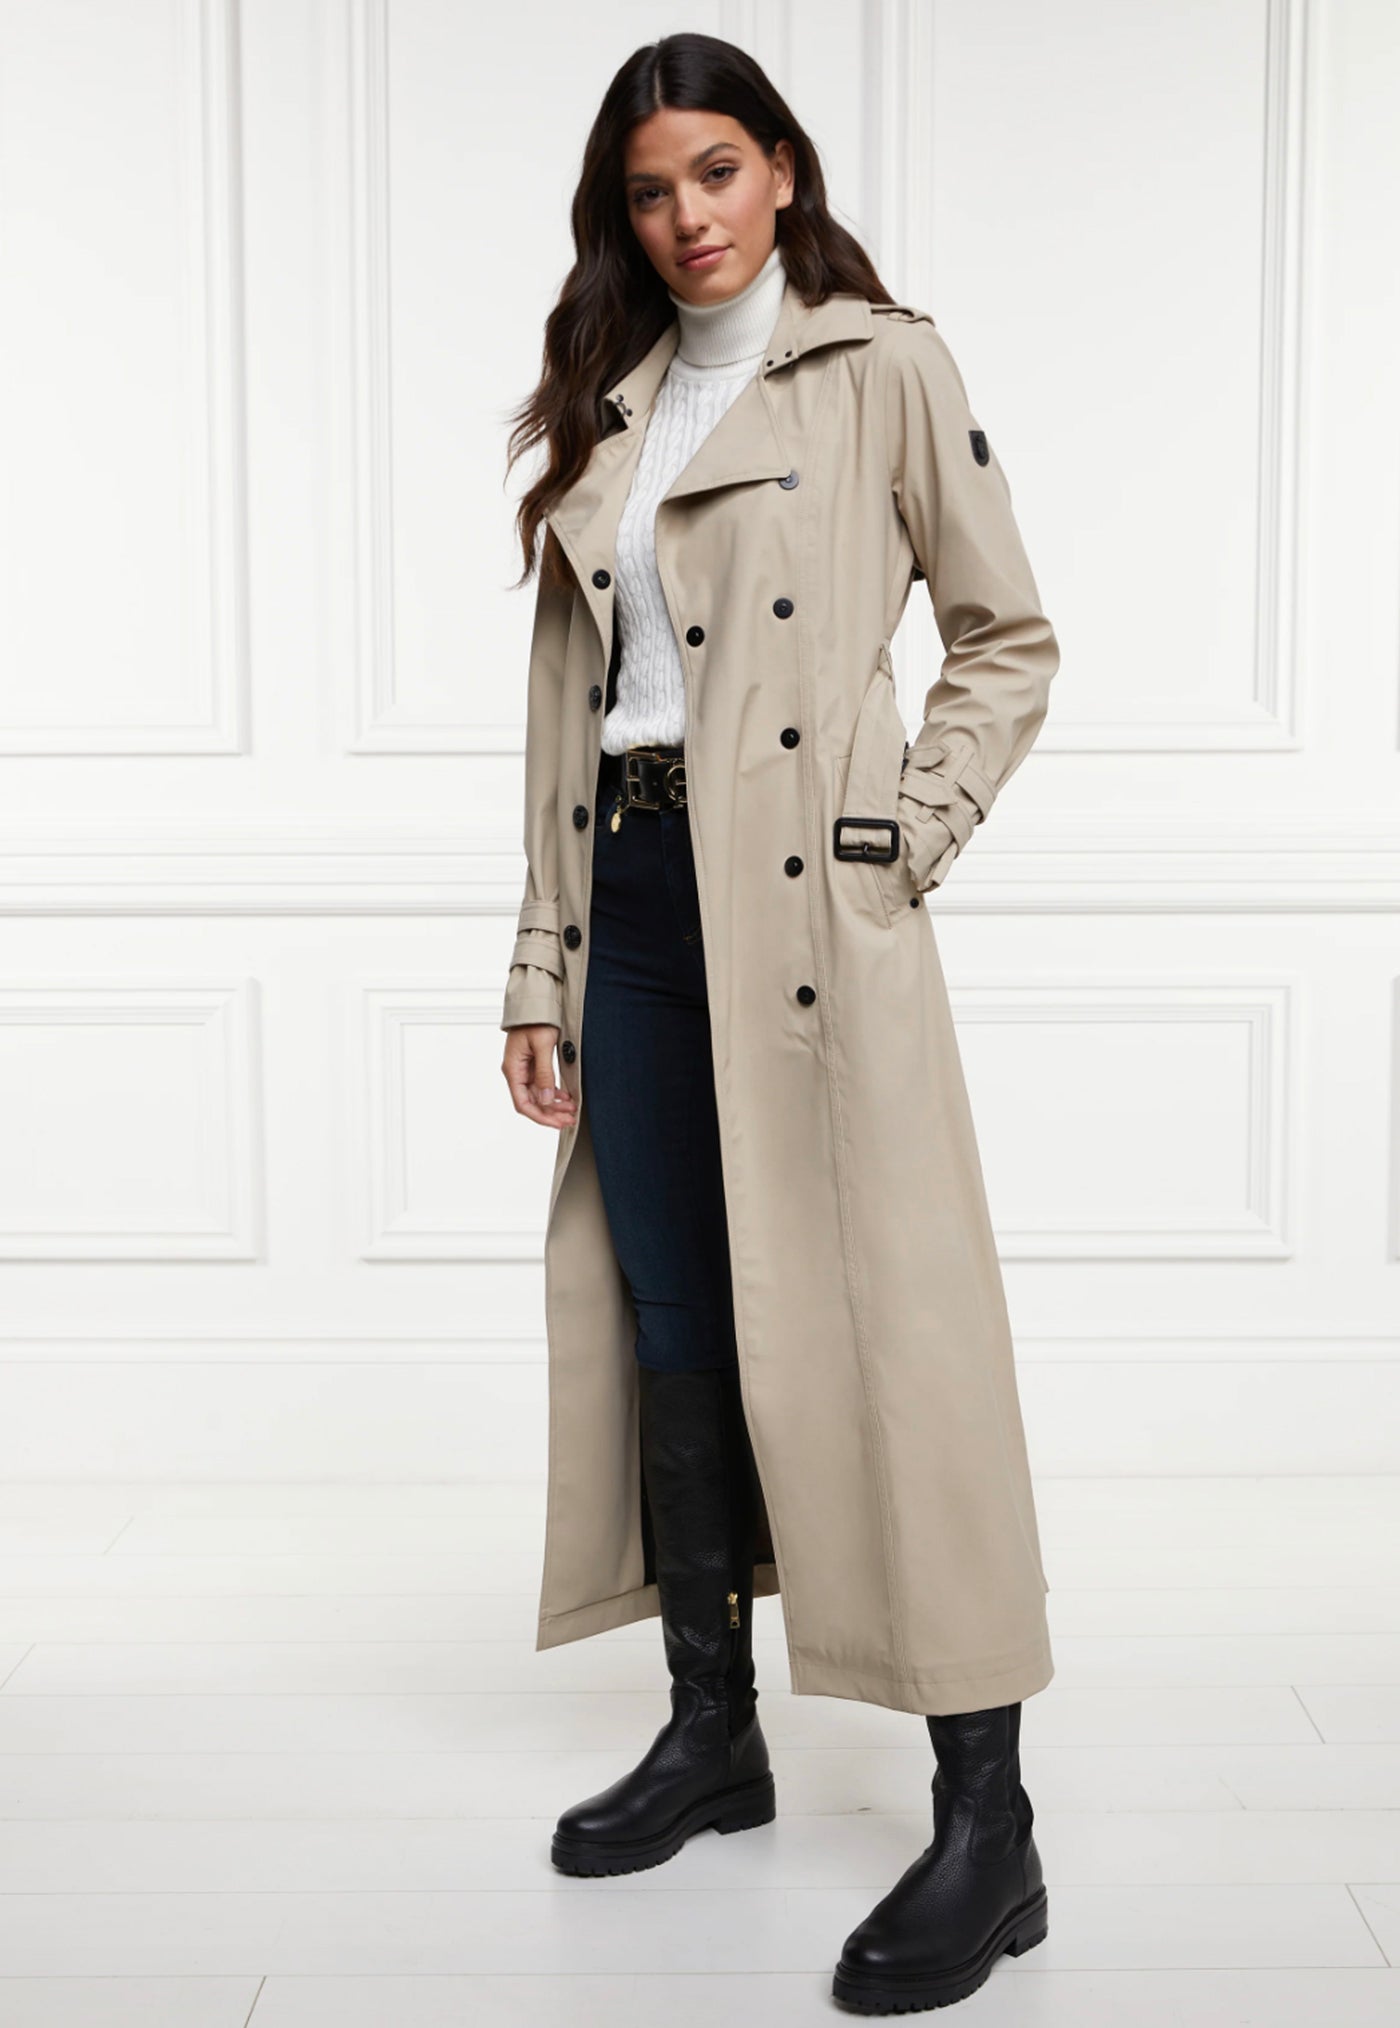 Kendall Waterproof Full Length Trench Coat - Stone sold by Angel Divine